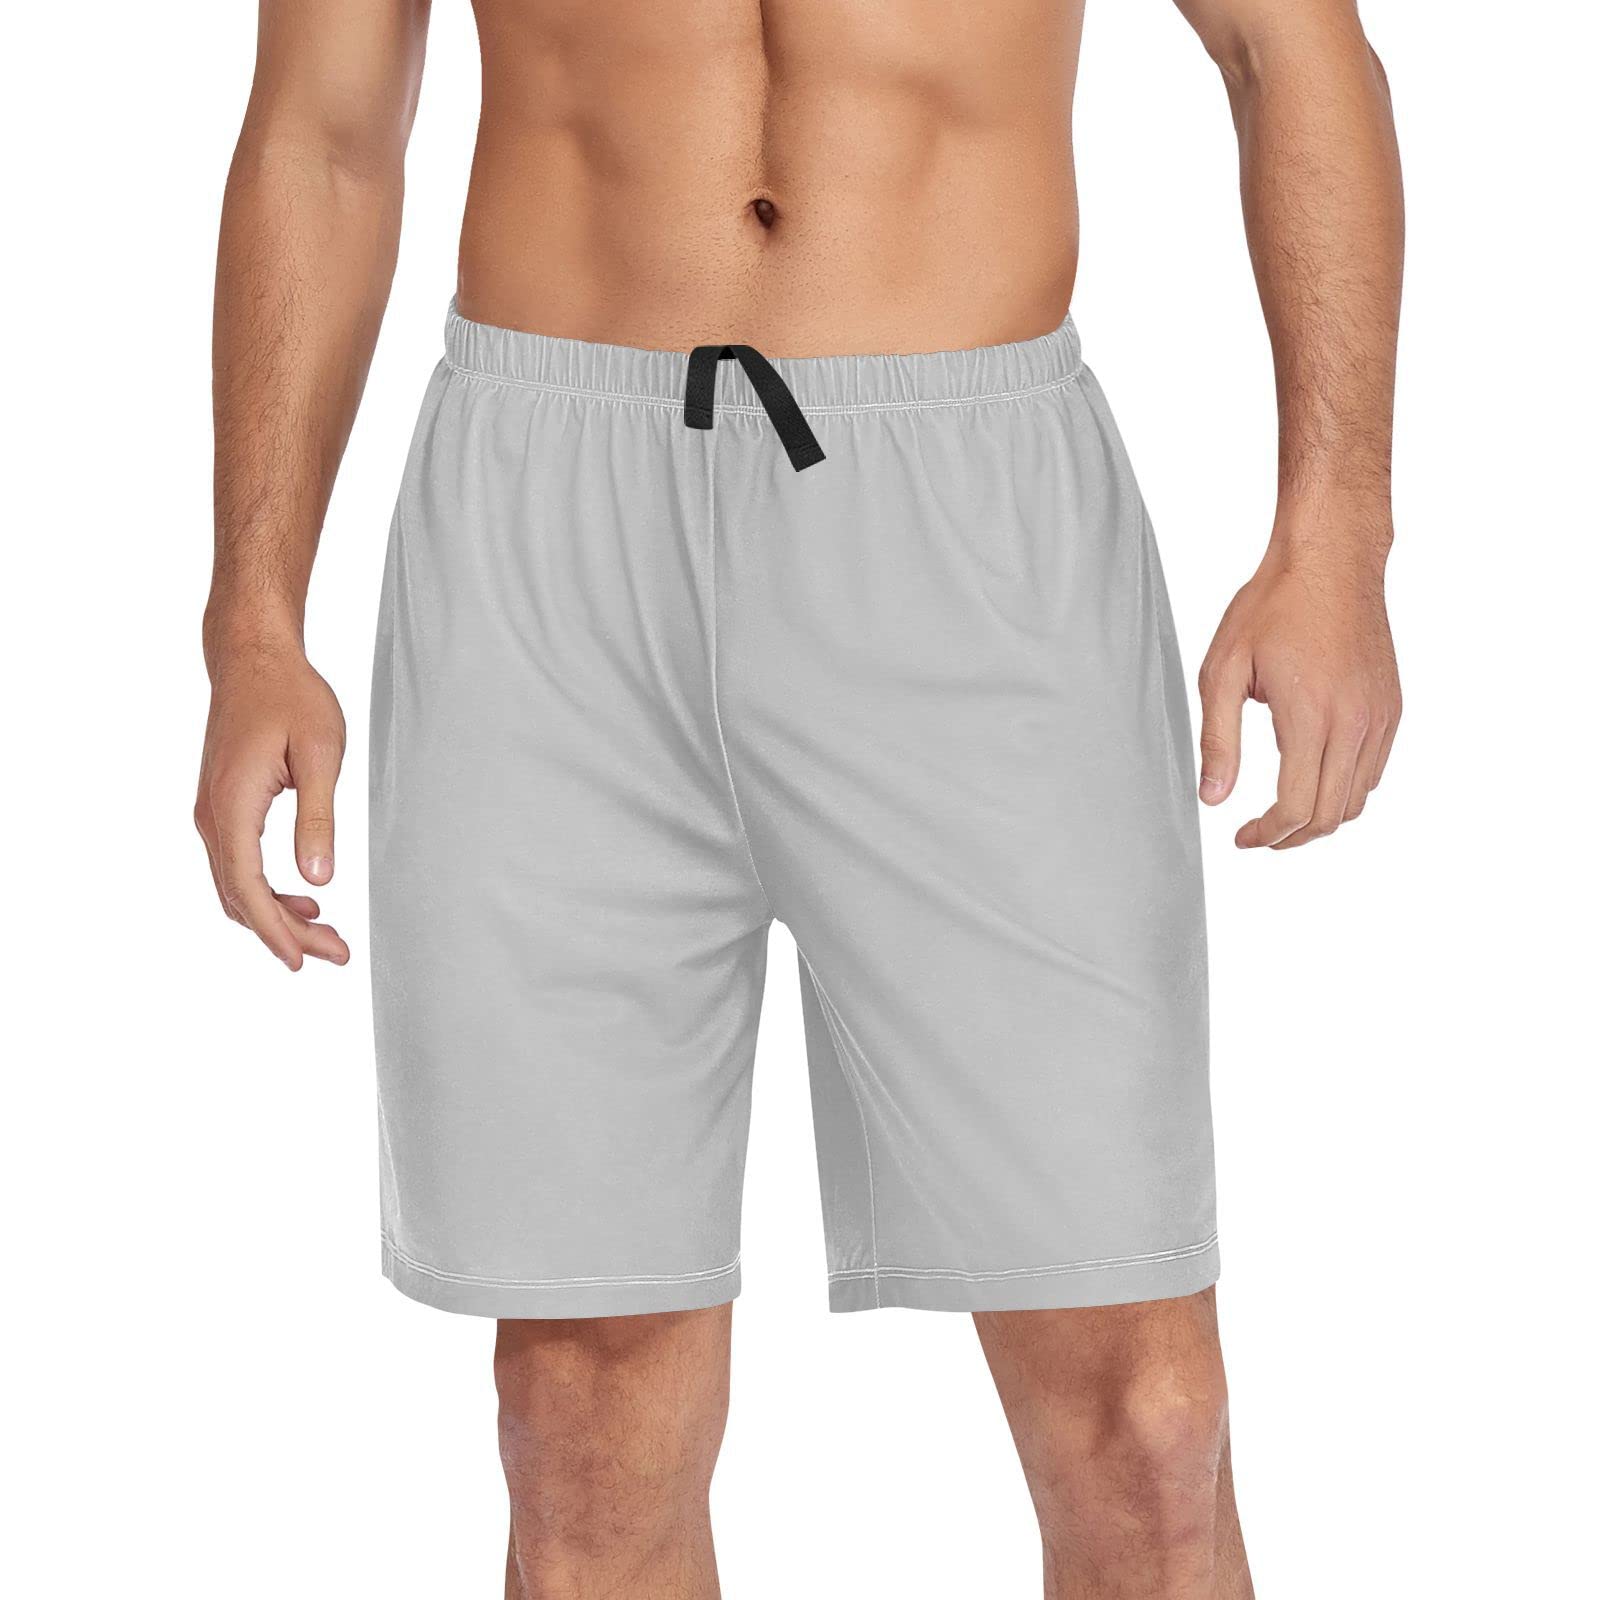 Mens lounge shorts are a versatile and comfortable clothing option suitable for various casual settings and activities.